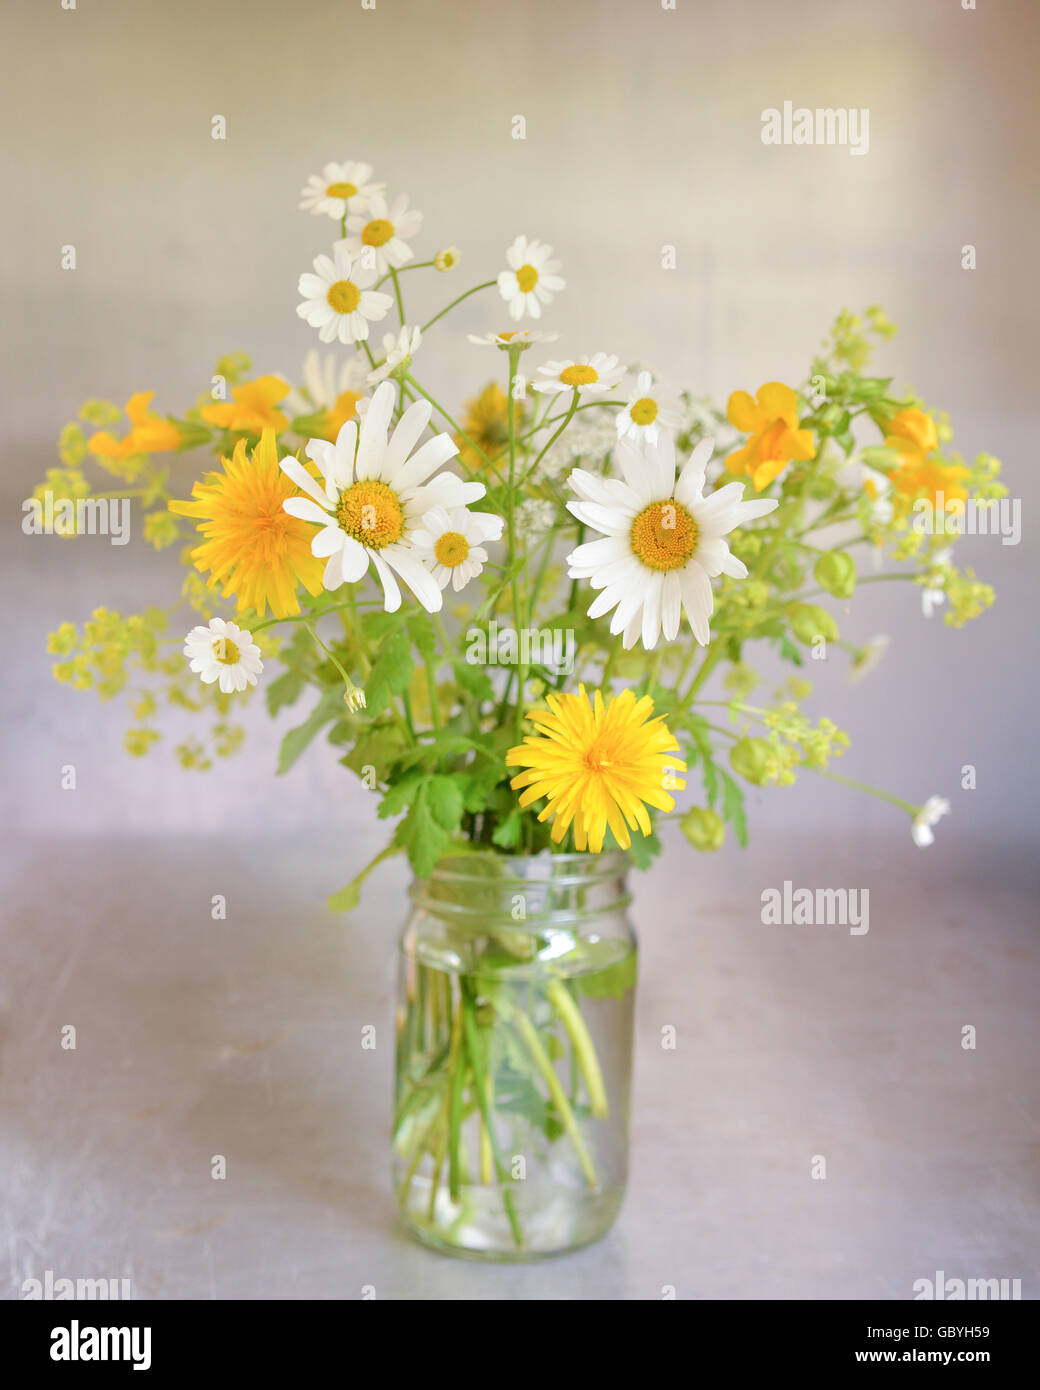 Download Jam Jar Flowers Pretty Informal Arrangement Of Yellow And White Stock Photo Alamy Yellowimages Mockups